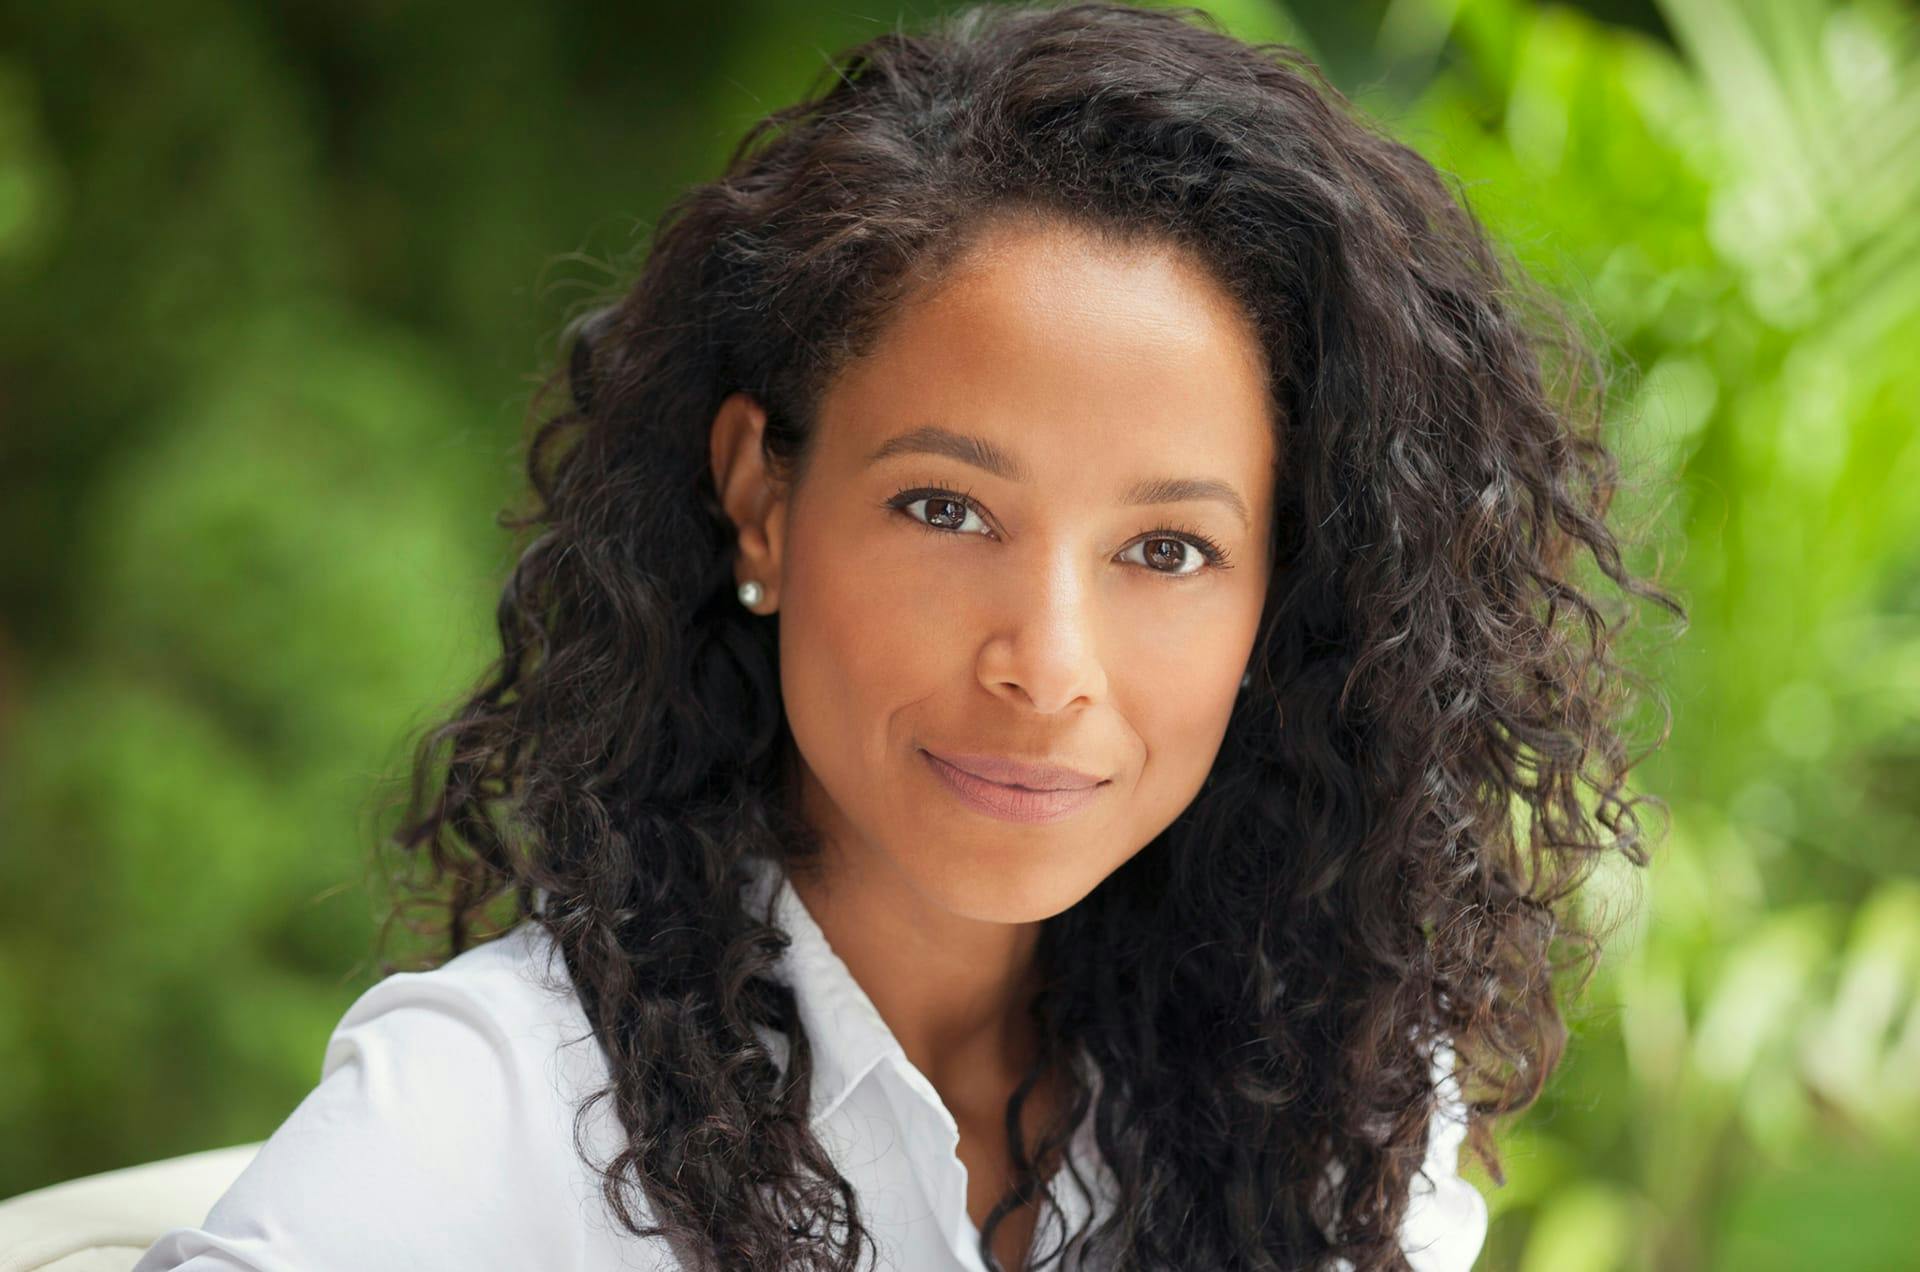 Woman in a white top and curly black hair